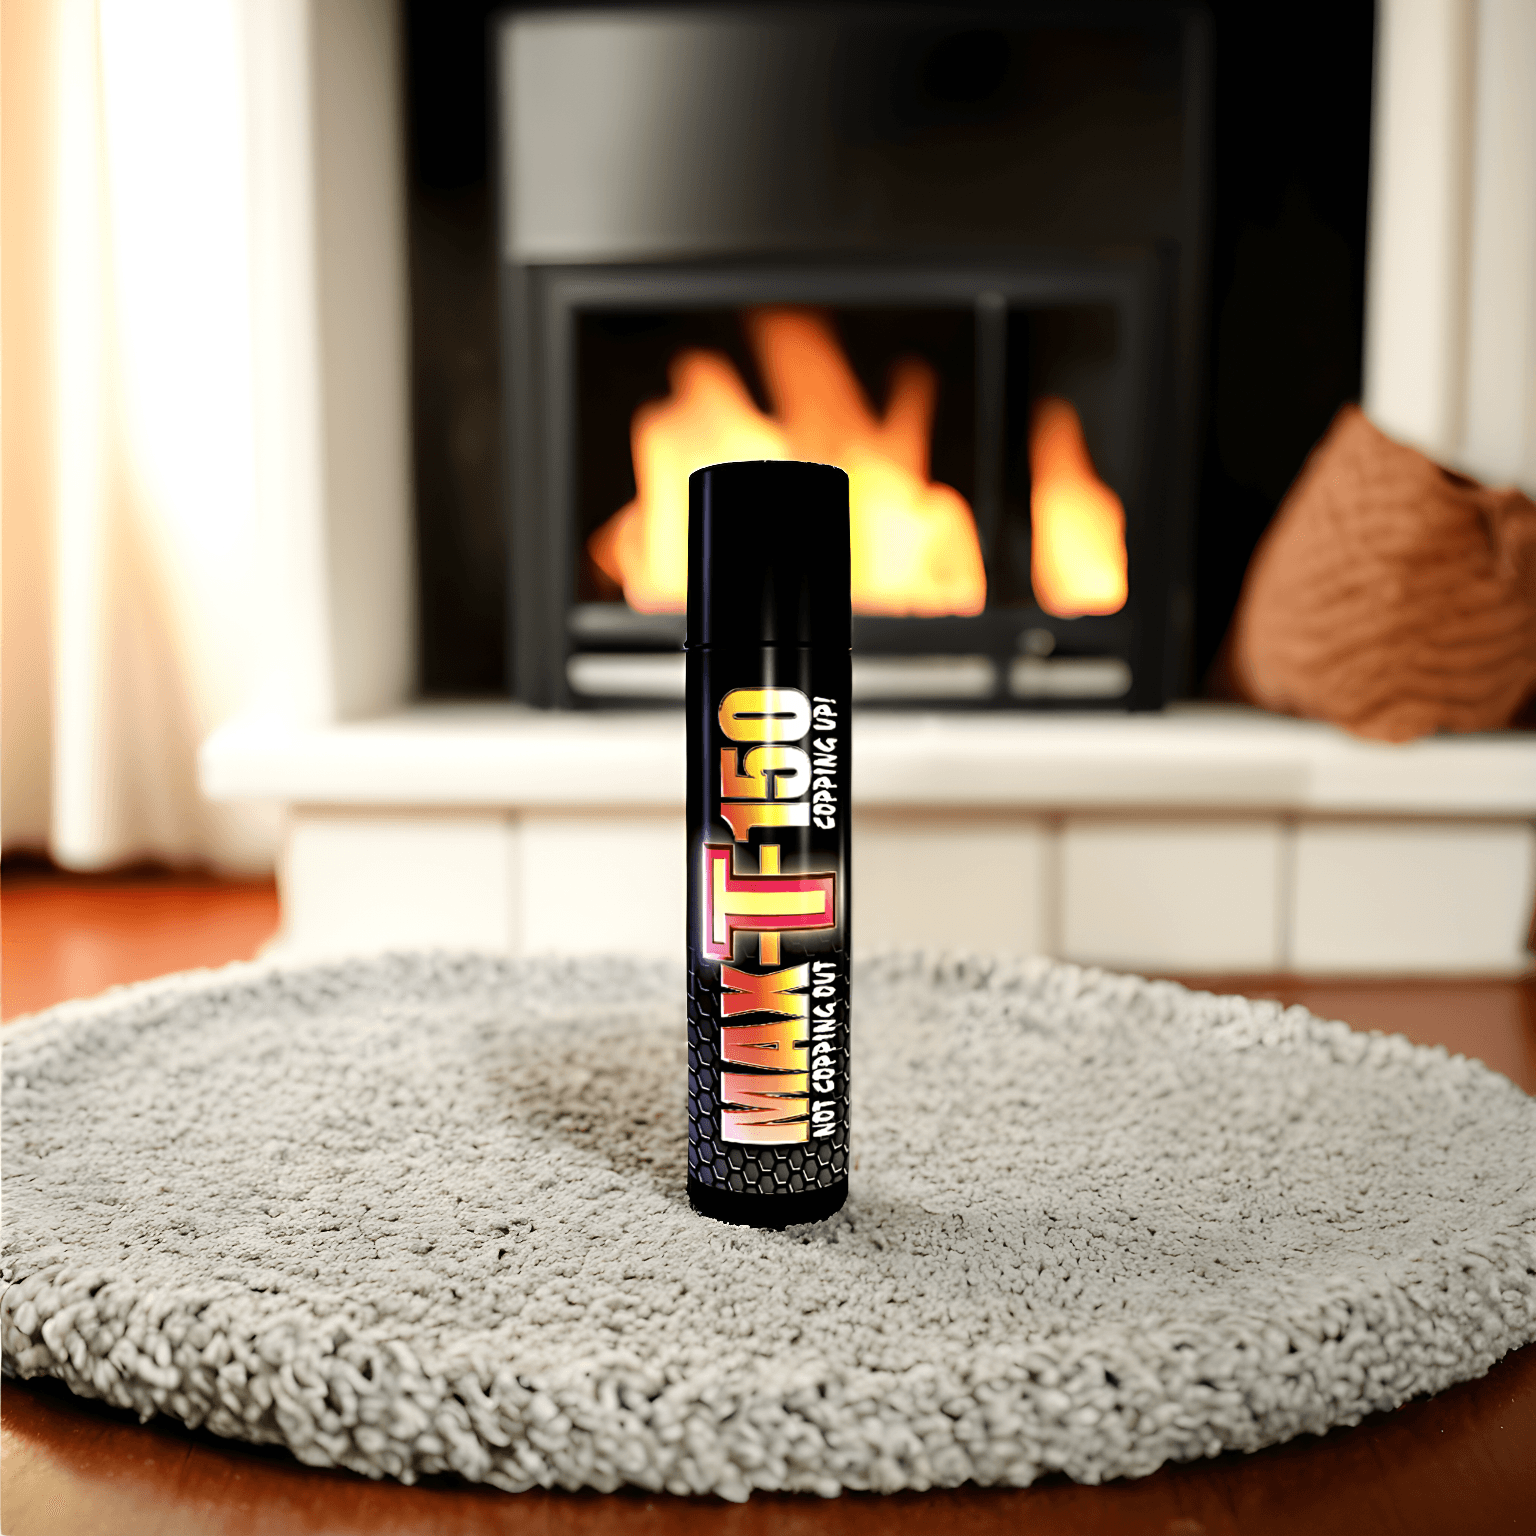 Max-T-150 Copulins Lip Balm Stick by Royal Pheromones, designed for testosterone boost, displayed on a rug in a cozy room with a fireplace in the background. Ideal pheromone product for workouts.